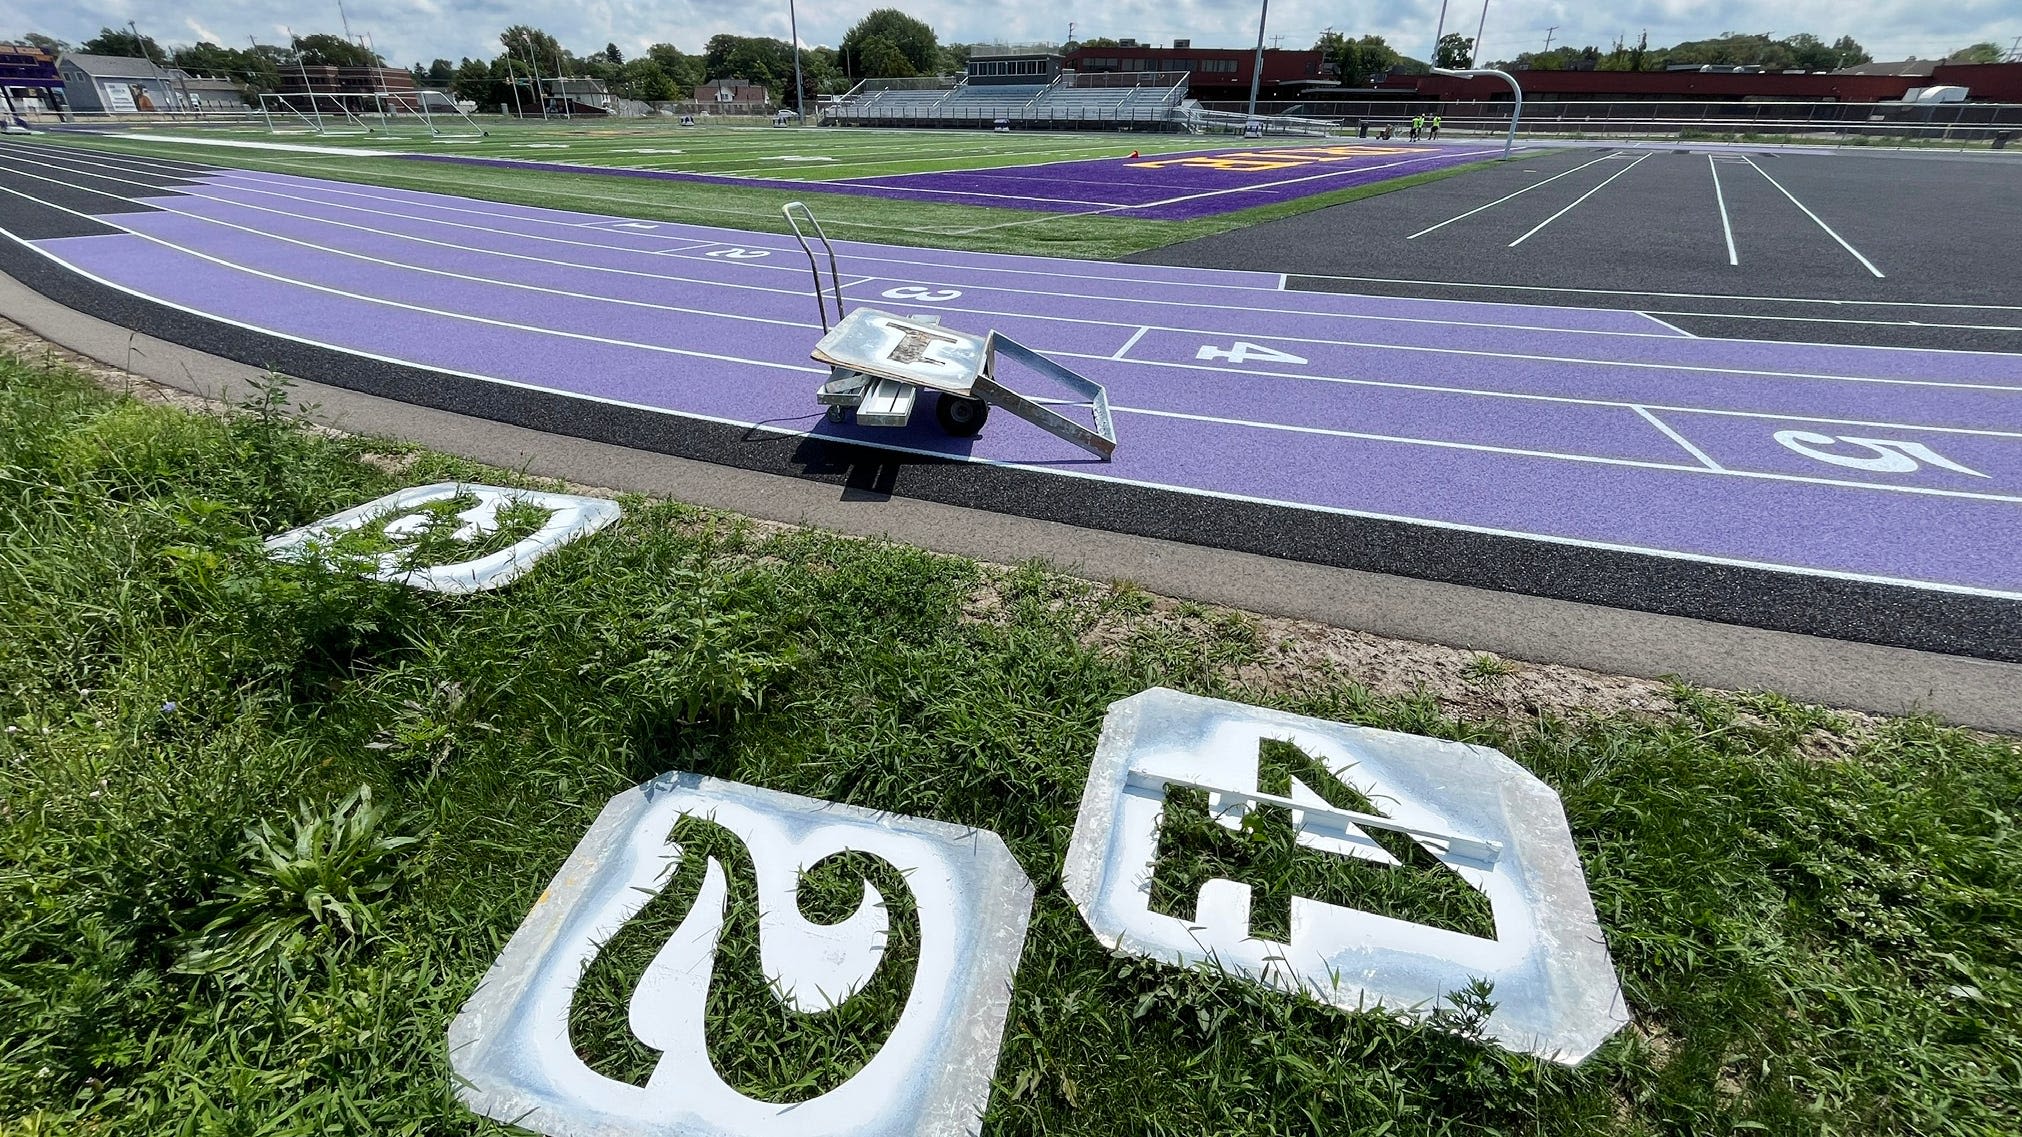 Biletnikoff Field, named for Erie great Fred Biletnikoff, ready for area athletes